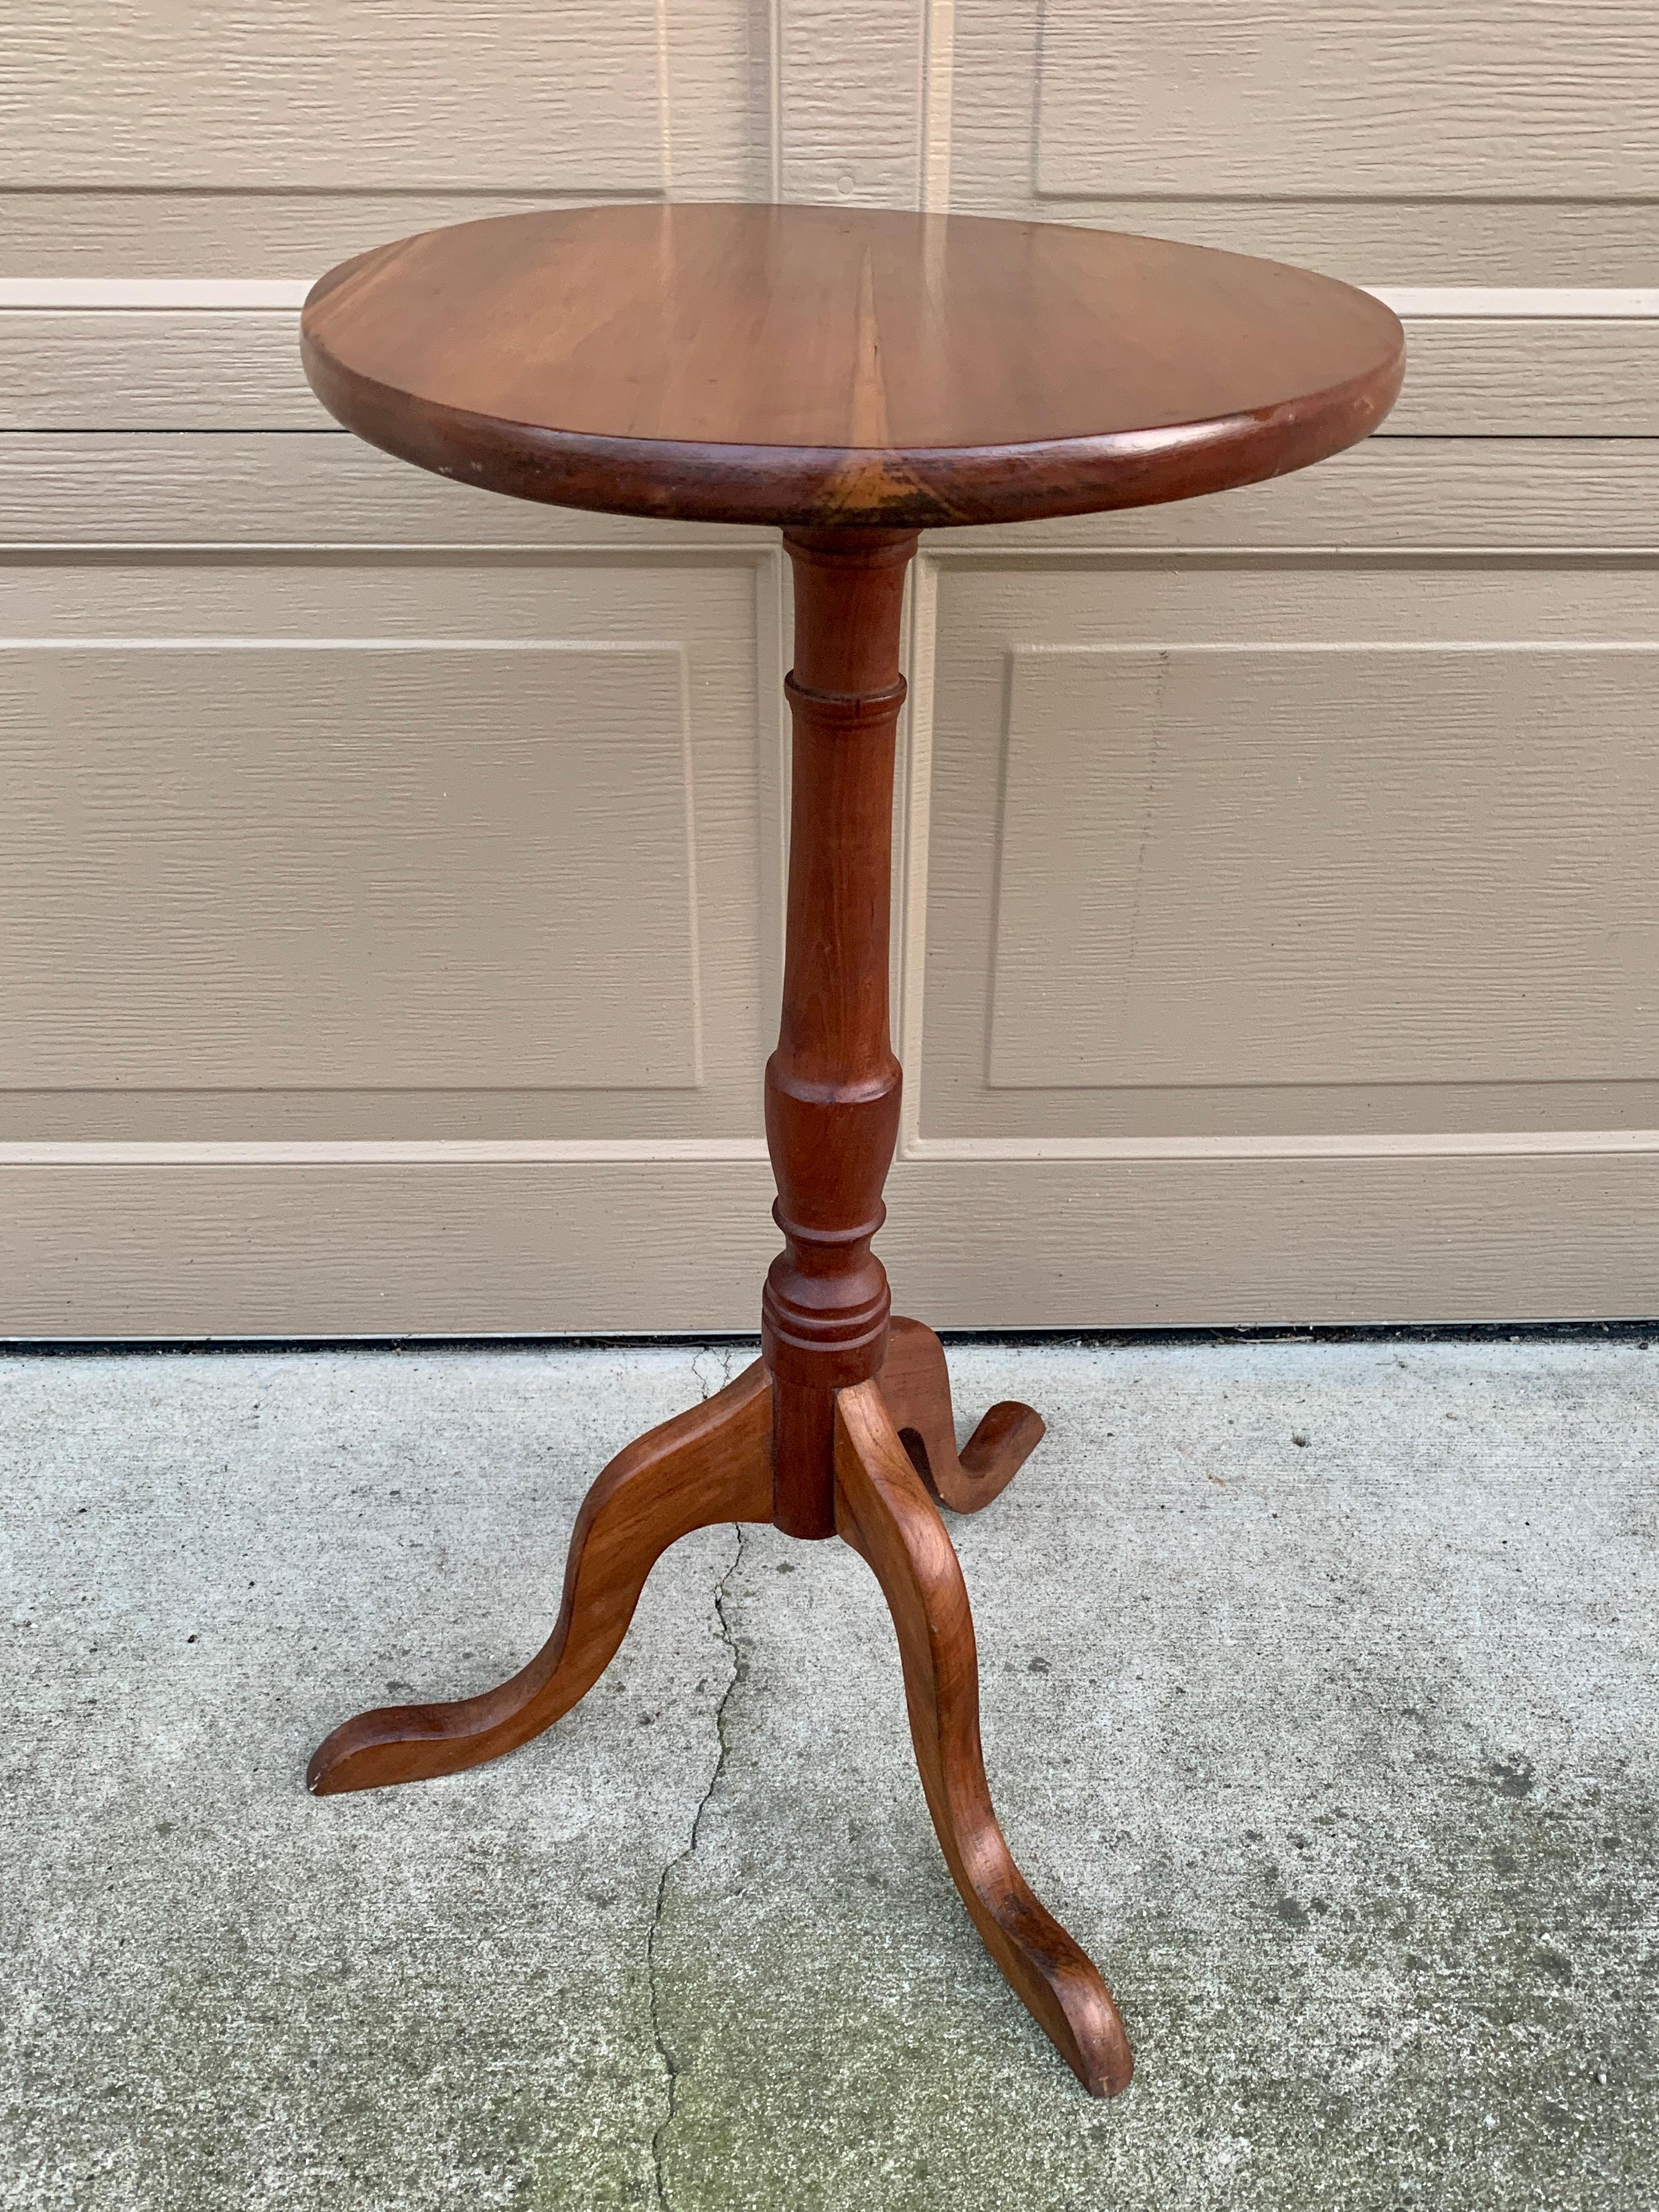 Antique American Colonial Cherry Candle Stand or Side Table, Mid 19th Century For Sale 7